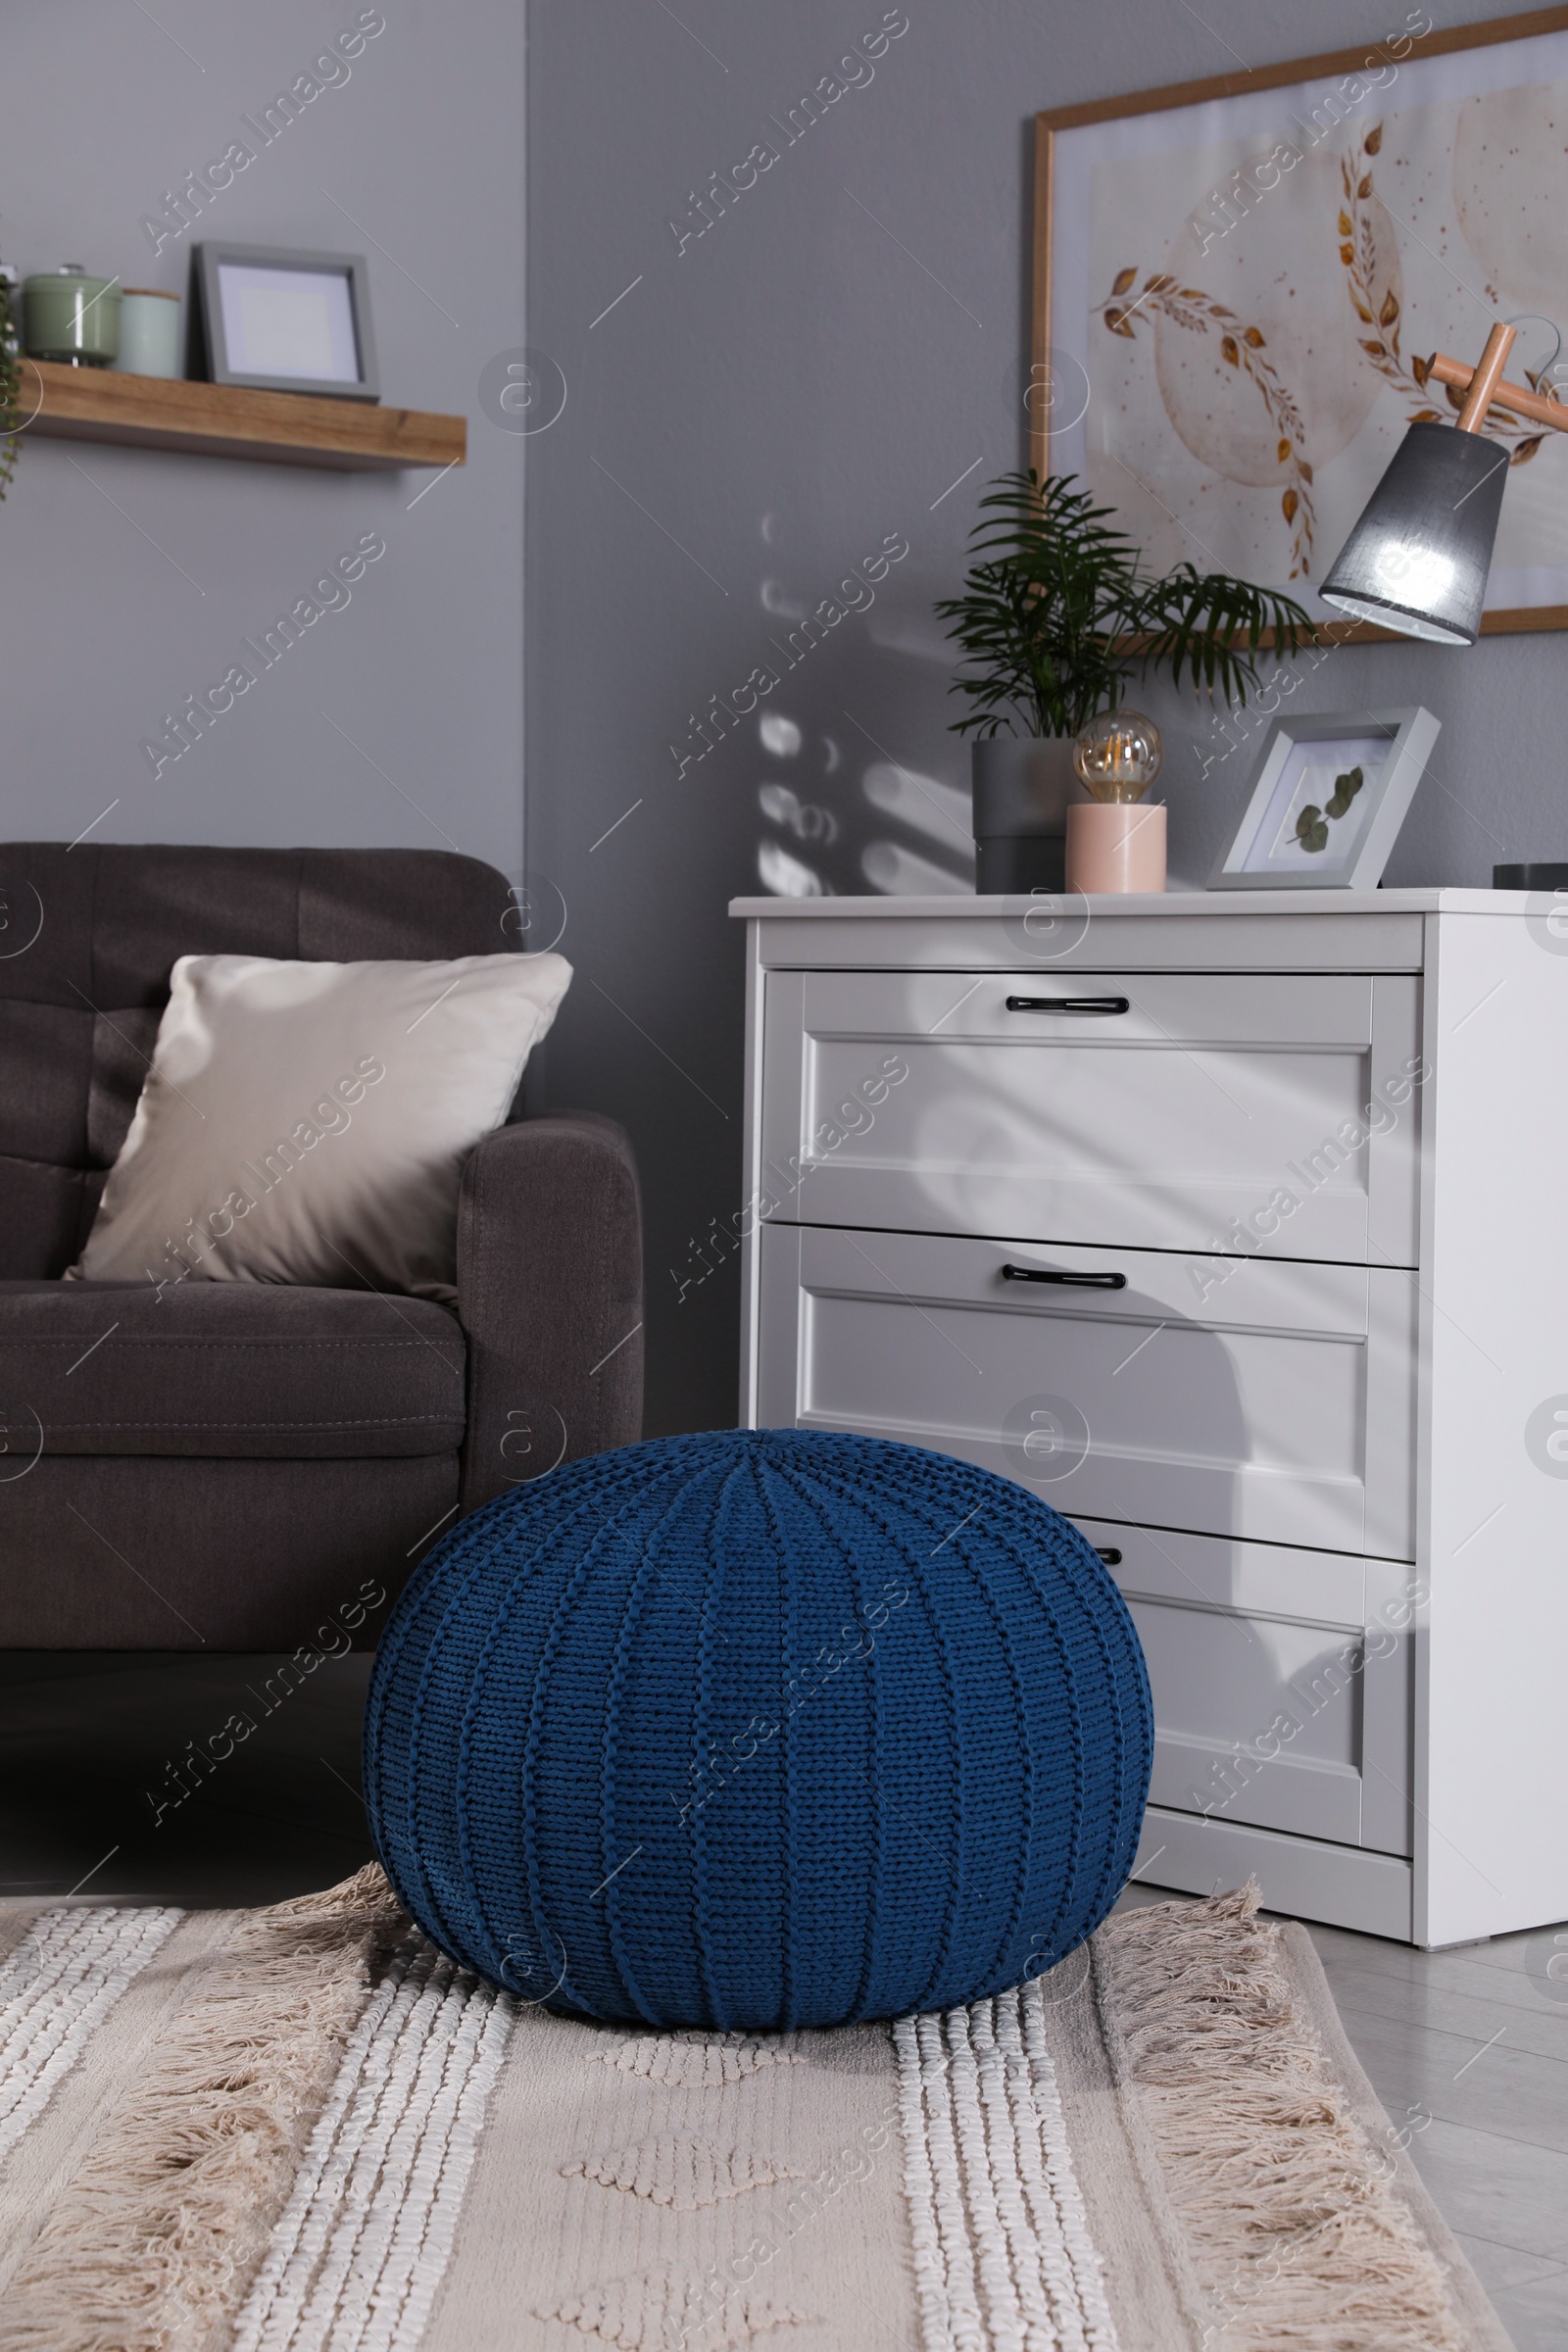 Photo of Stylish knitted pouf and chest of drawers in room. Home design